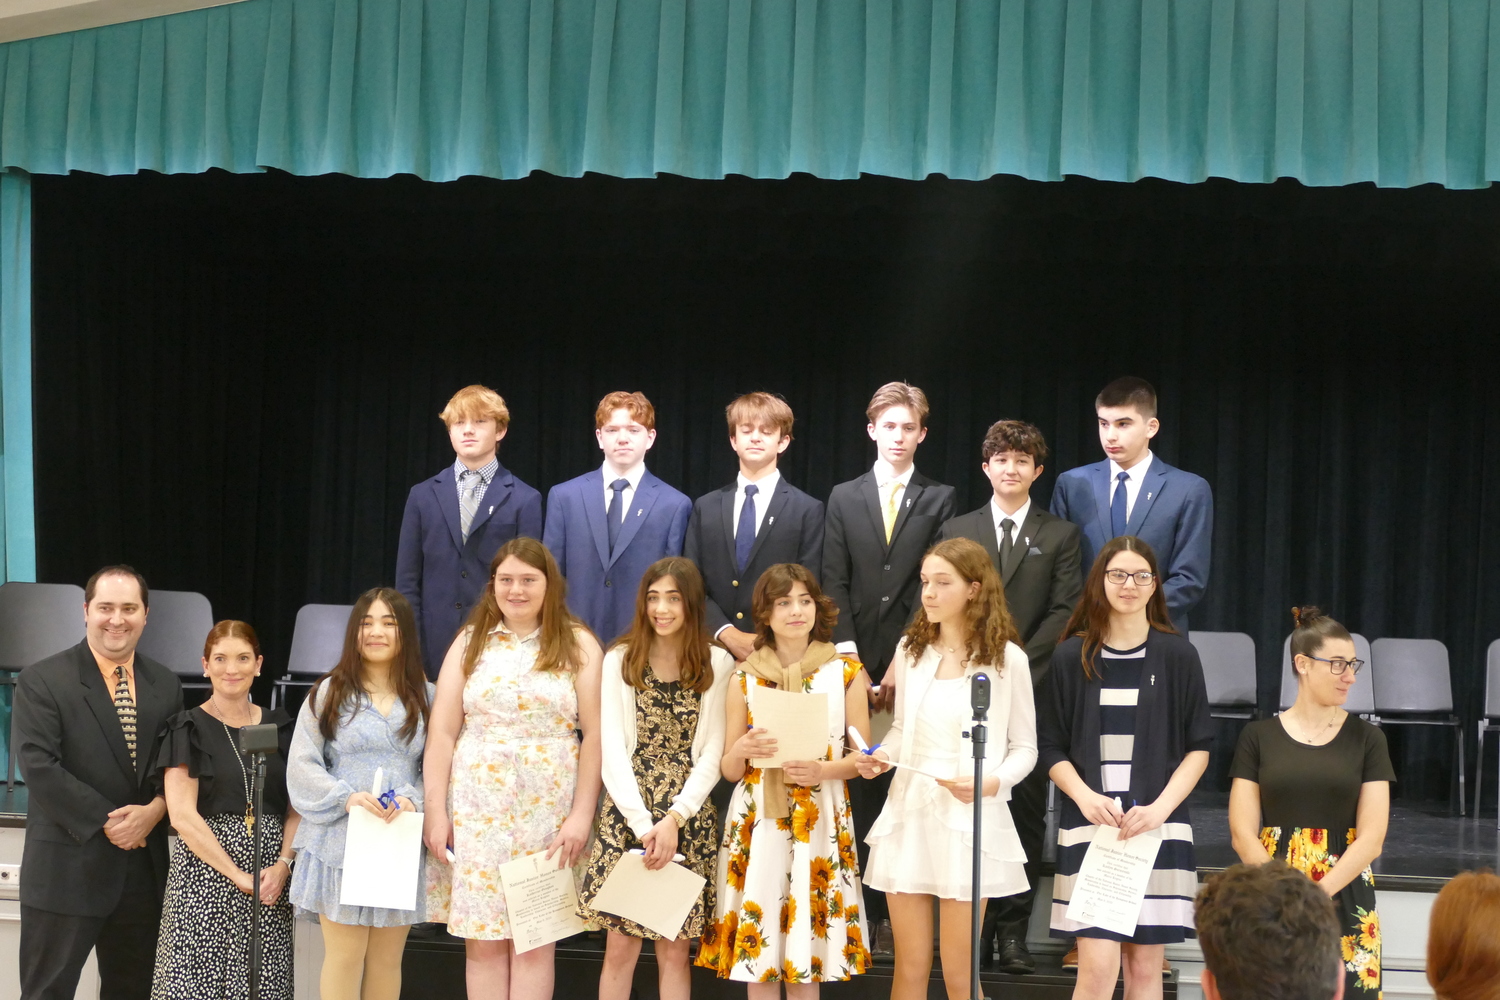 At Our Lady of the Hamptons School, 12 students were recently inducted into the National Junior Honor Society. COURTESY OUR LADY OF THE HAMPTONS SCHOOL